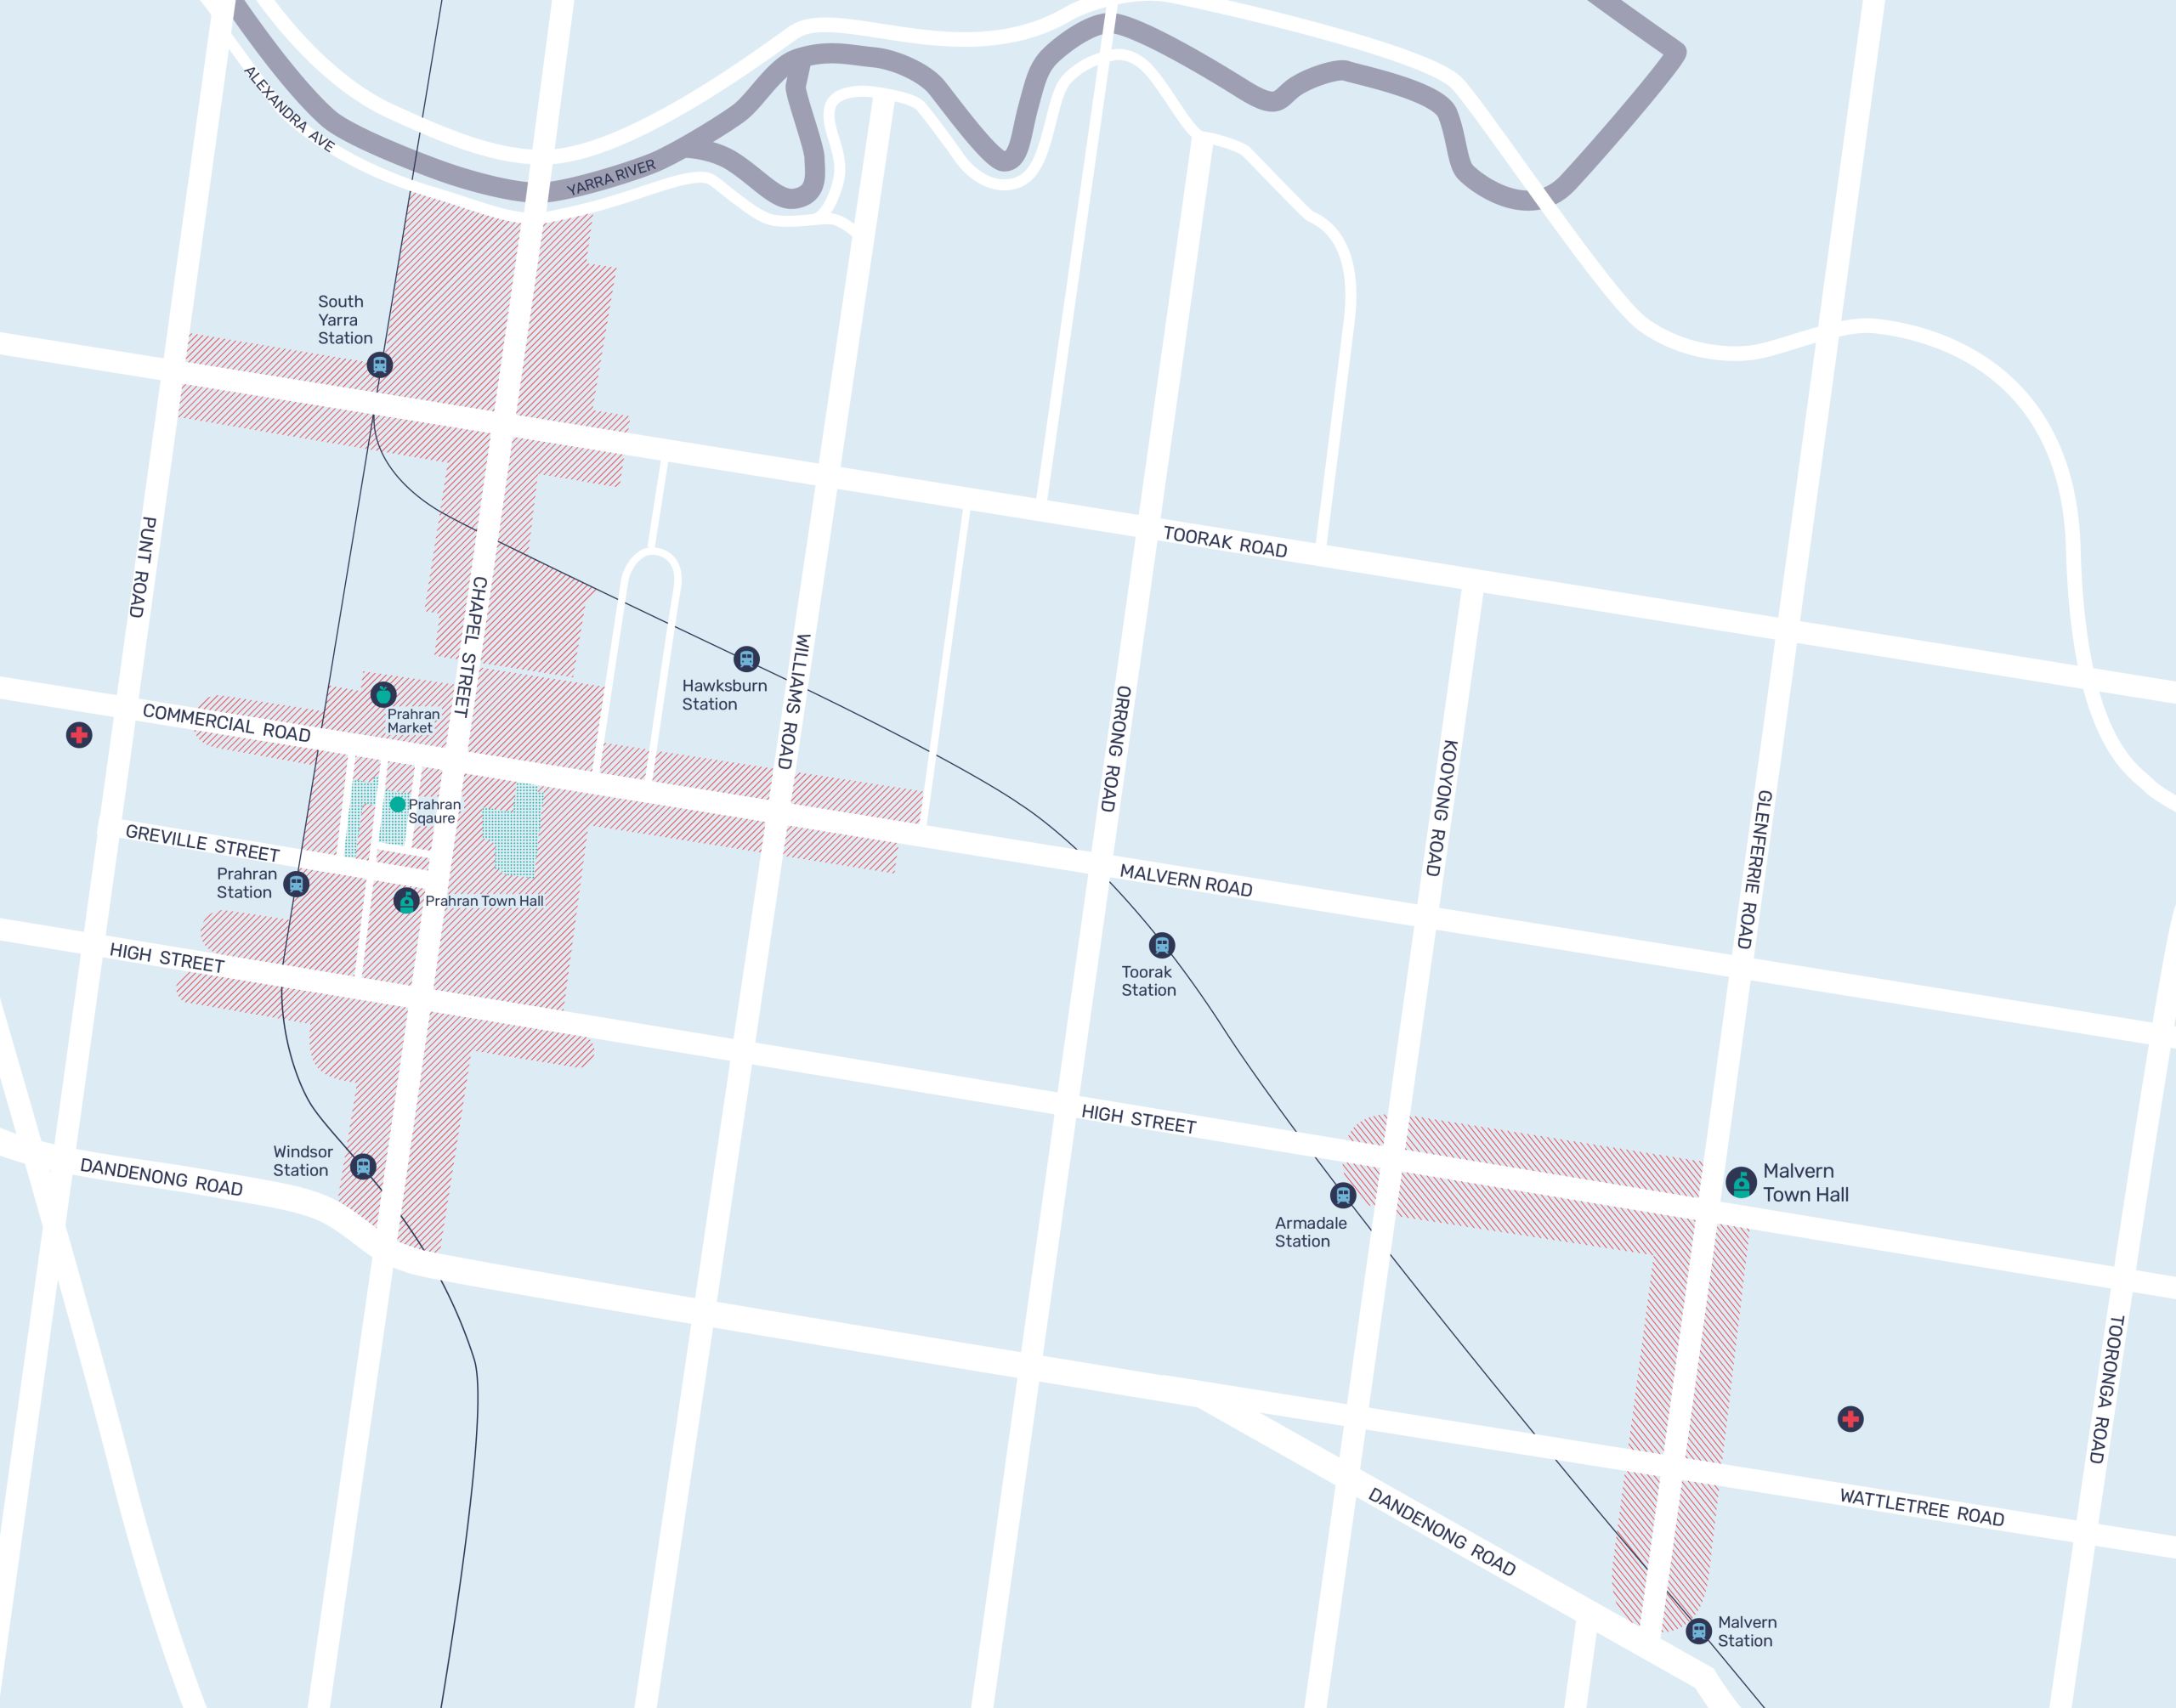 Placemaking precincts - complete map